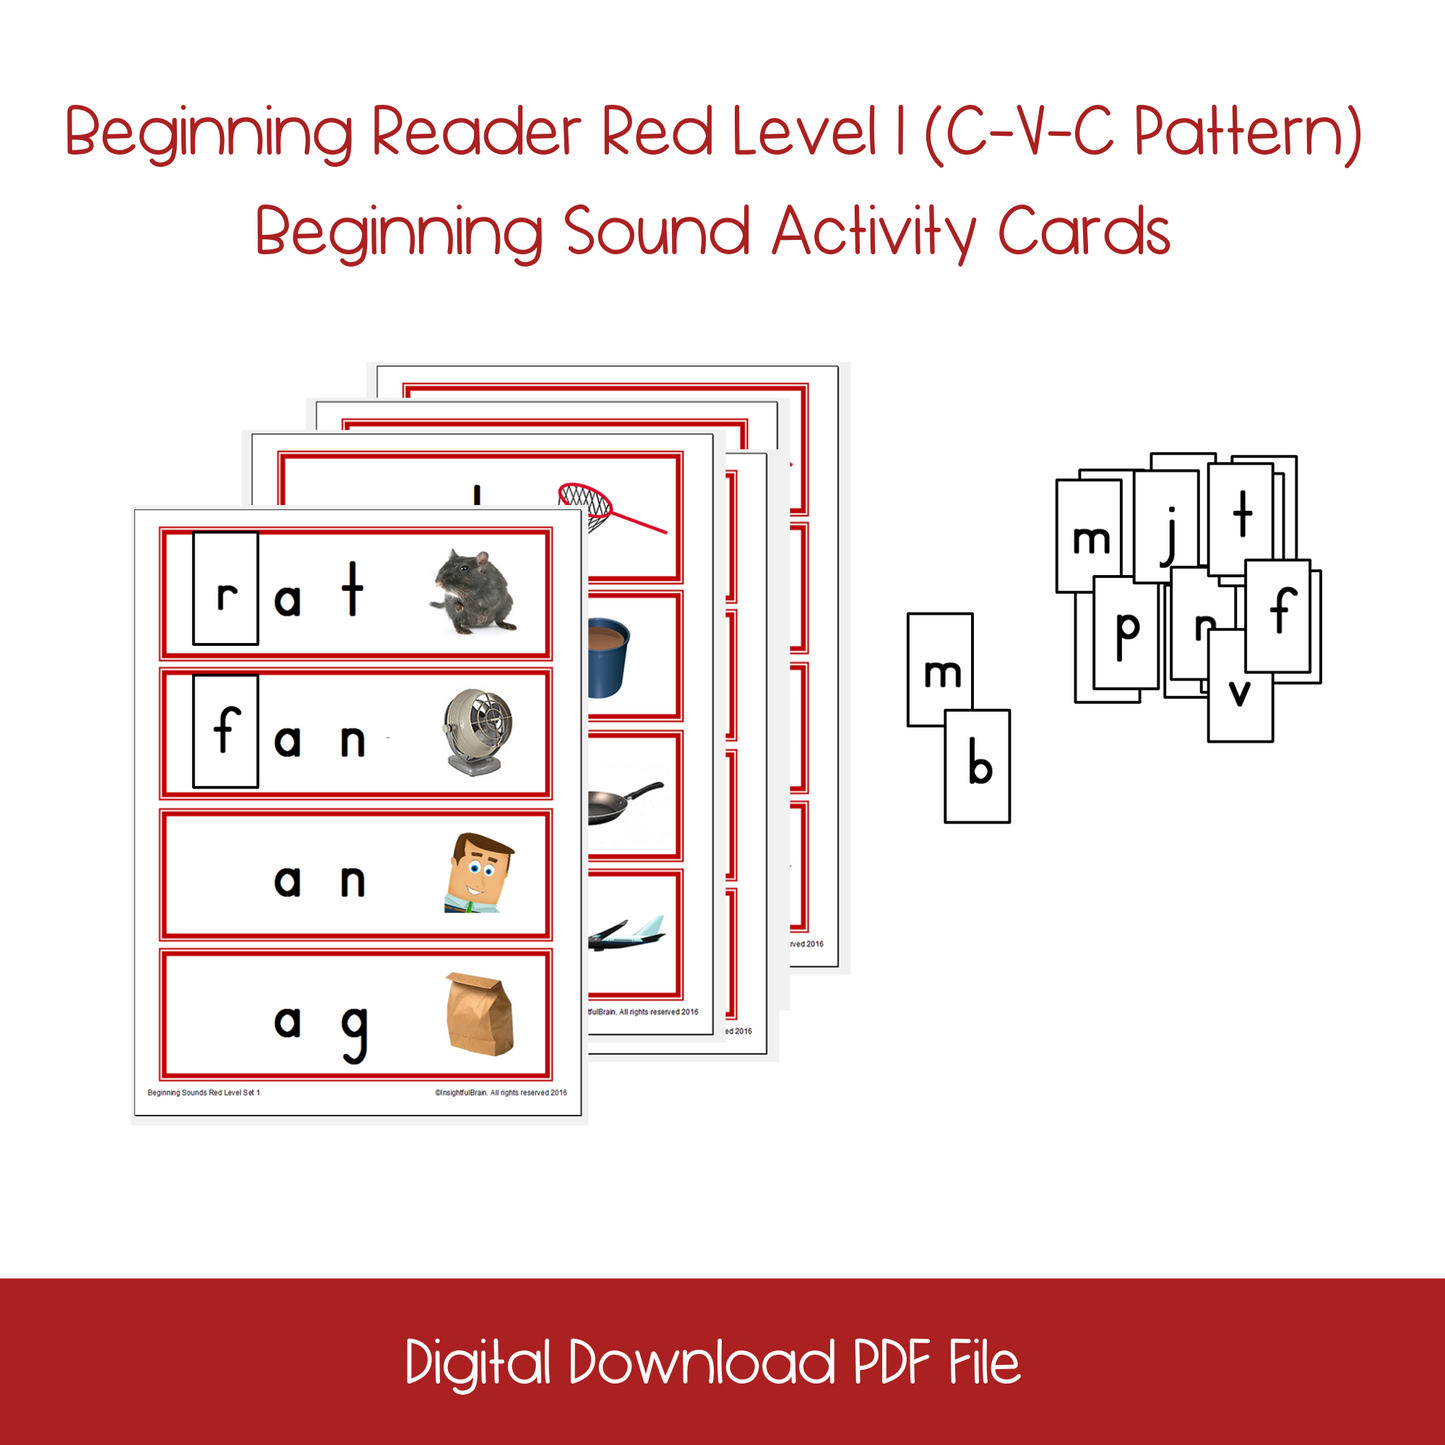 Printable Beginning Sound Activity Cards Set1, montessori Printable Beginning Sound Activity Cards Set1, homeschool Printable Beginning Sound Activity Cards Set1, printable ESL Beginning Sound Activity Cards Set1, printable ELL Beginning Sound Activity Cards Set1, printable kindergarten beginning sound actcivity, English language learners